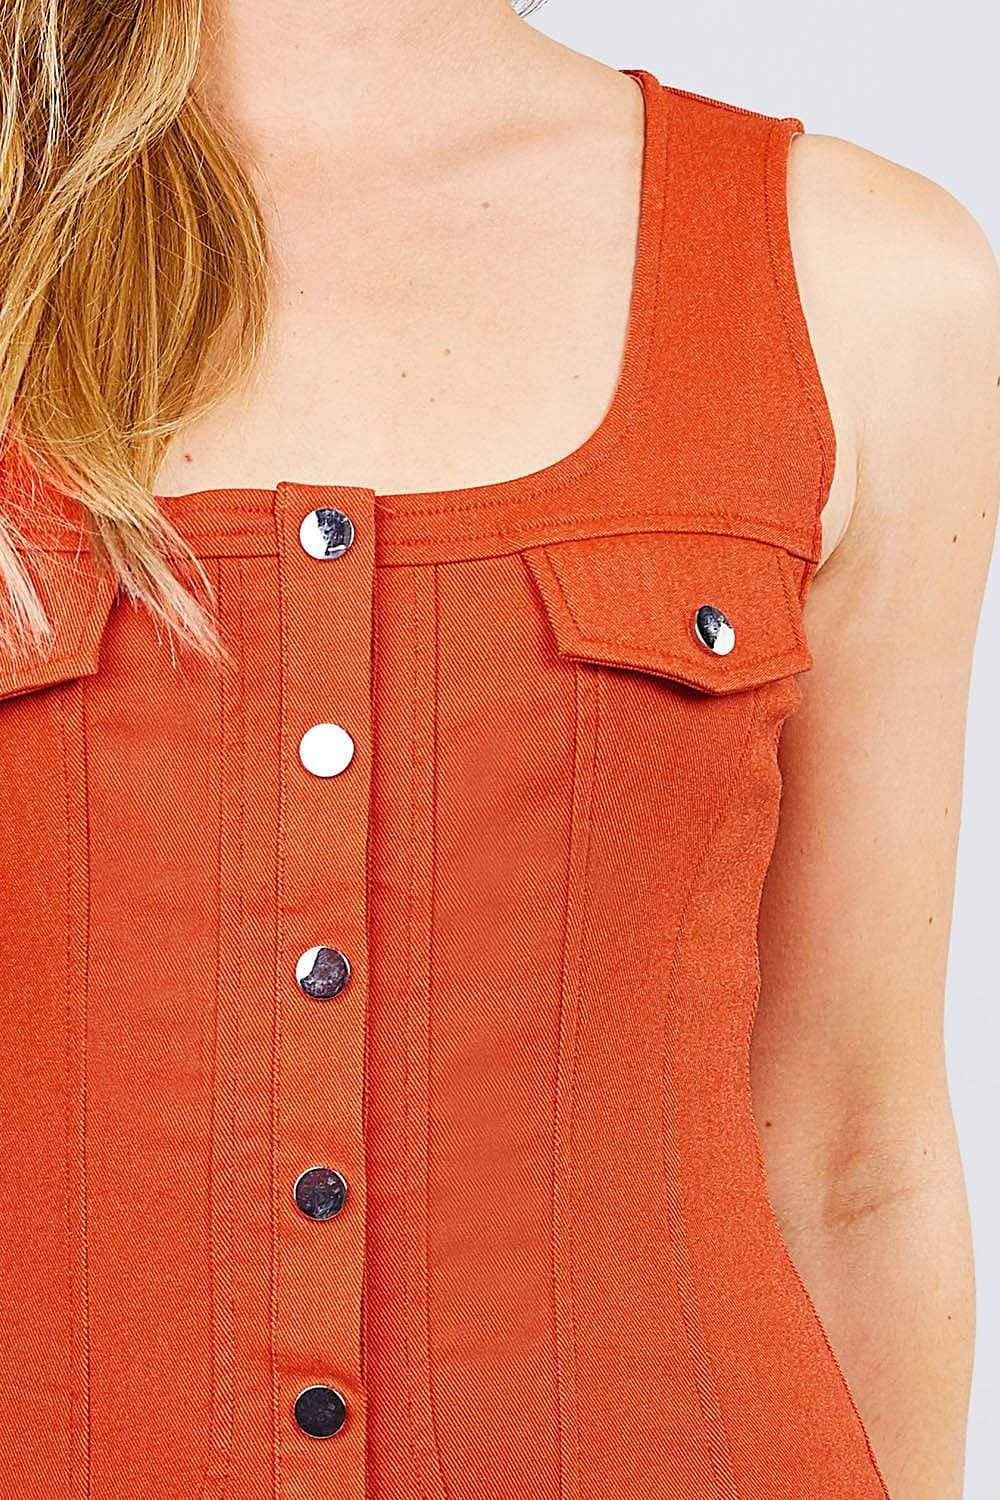 Orange Sleeveless Mini Dress With Front Buttons - Shopping Therapy, LLC Dress